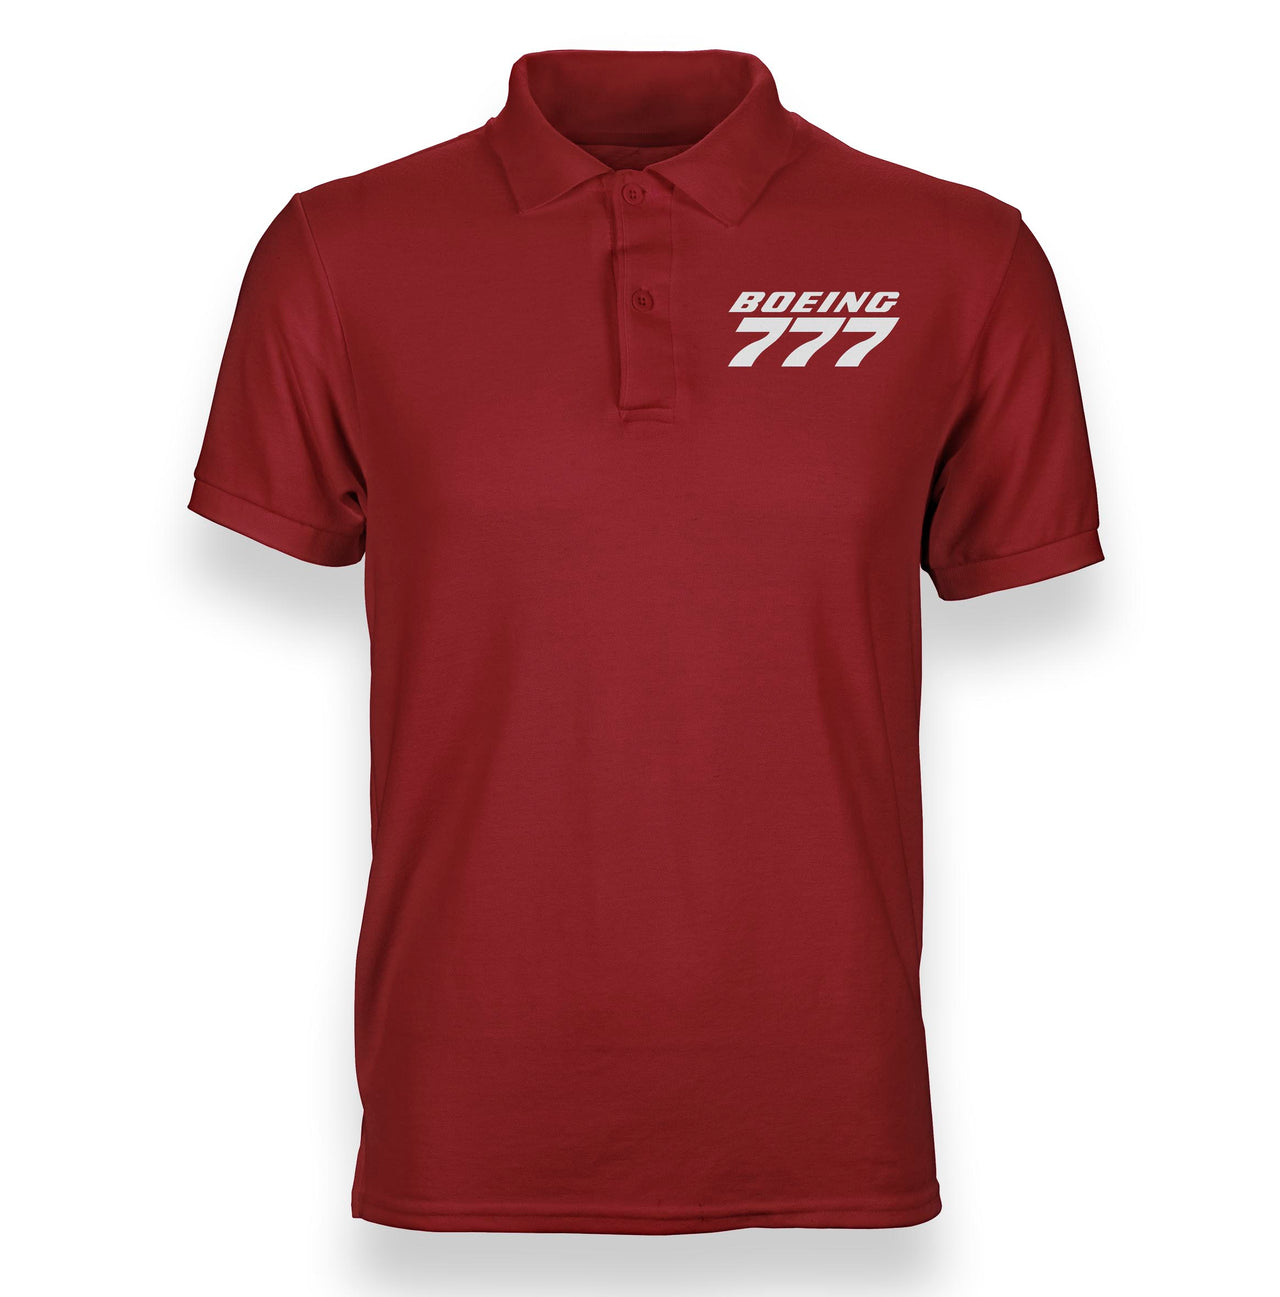 Boeing 777 & Text Designed Polo T-Shirts